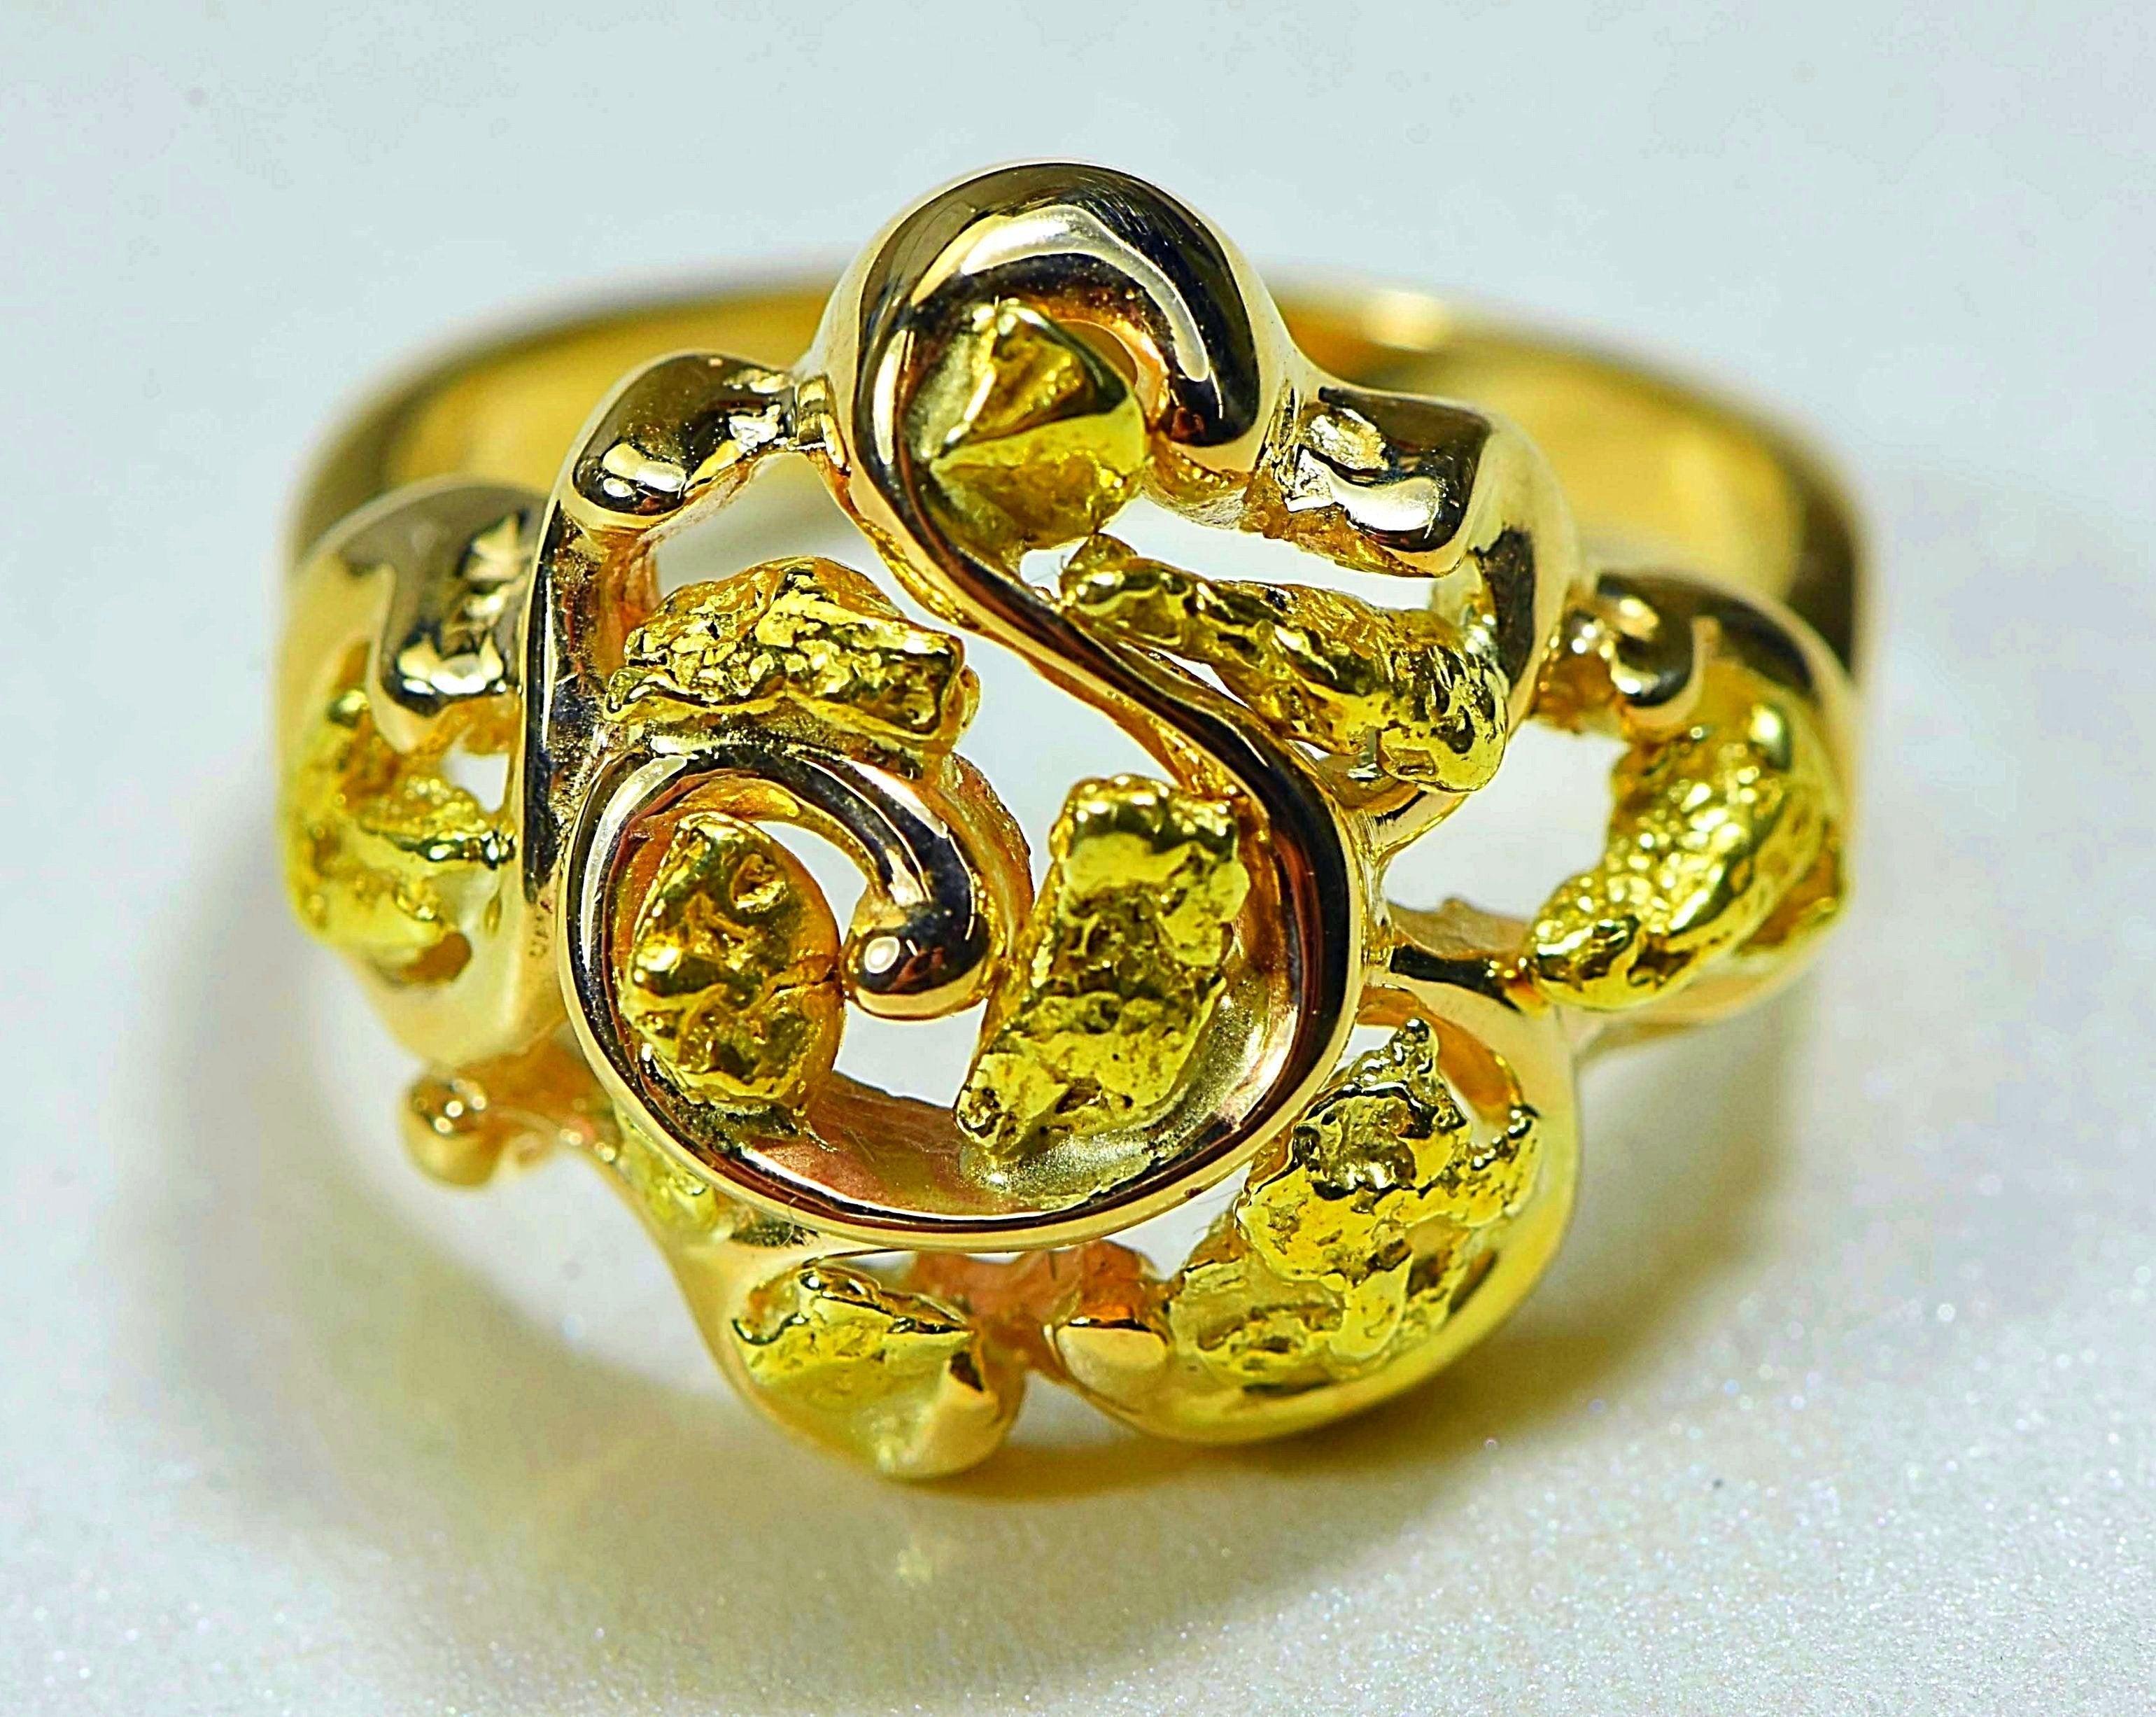 Gold Nugget Ladies Ring "Orocal" RL462 Genuine Hand Crafted Jewelry - 14K Casting